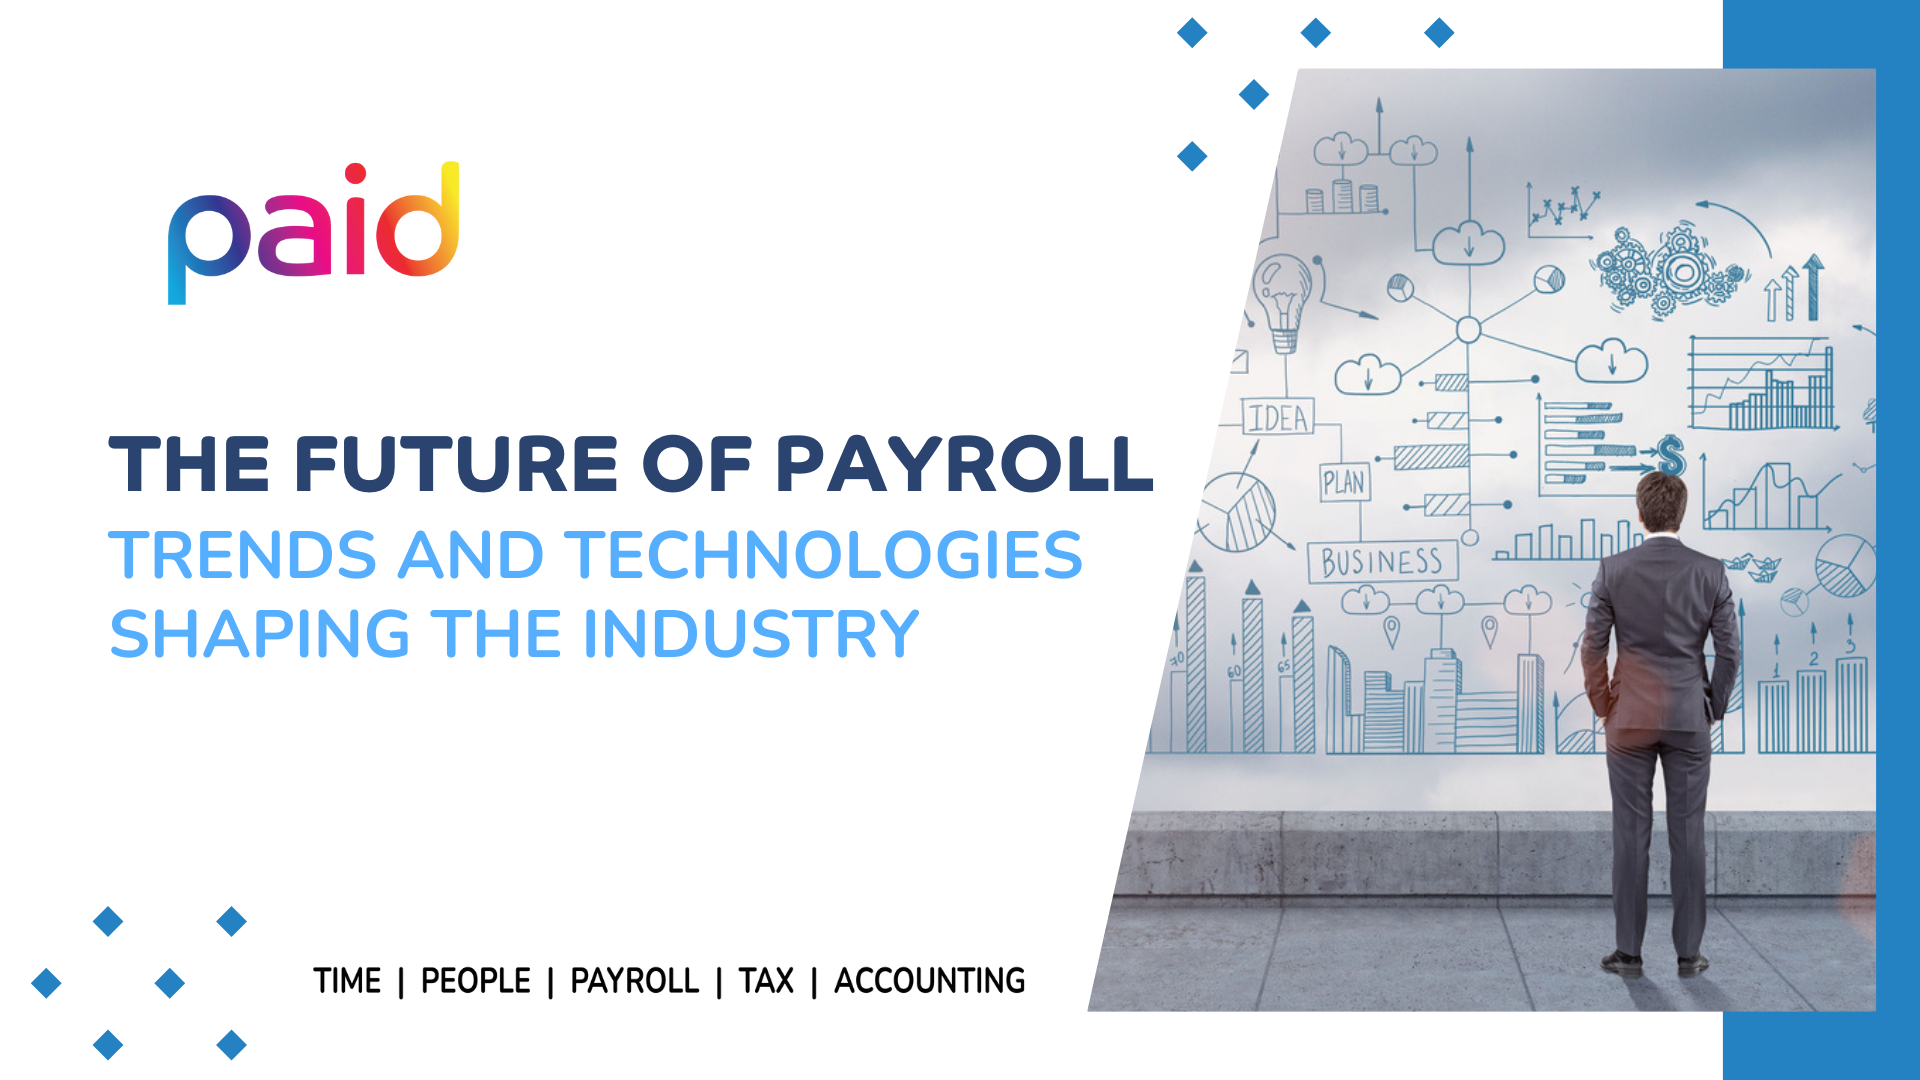 The Future of Payroll: Trends and Technologies Shaping the Industry